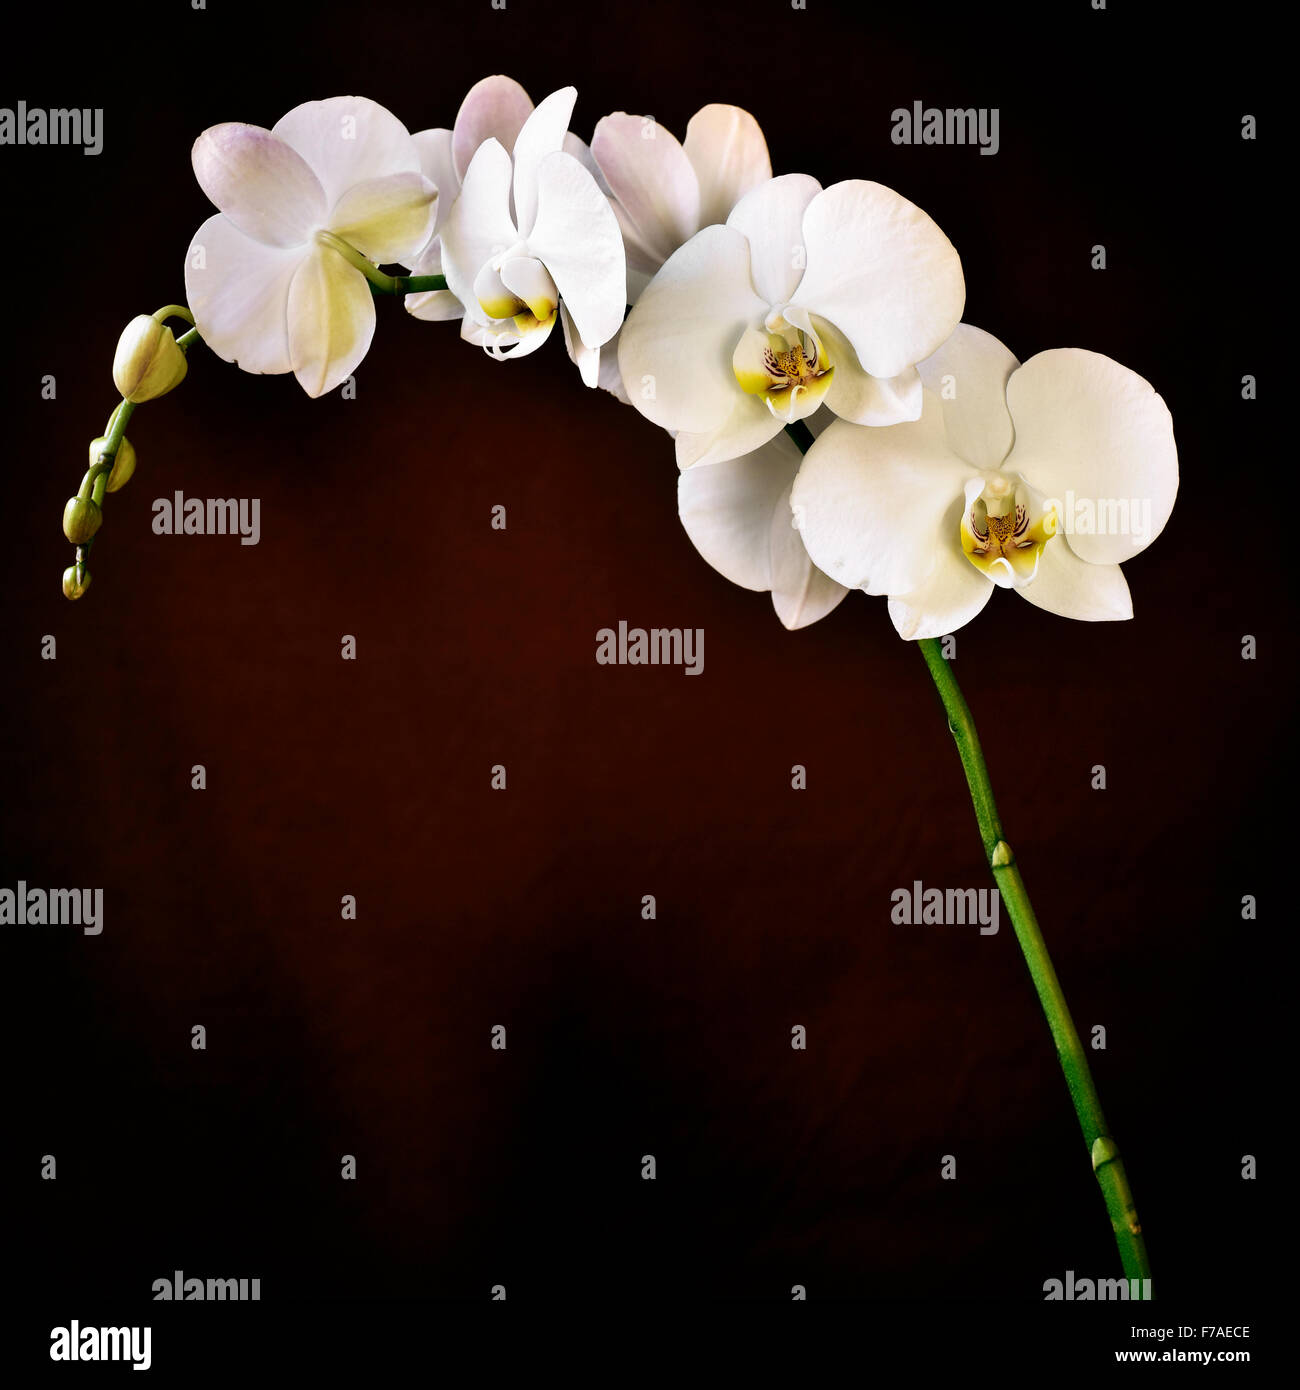 detail of the beautiful white flowers of a Phalaenopsis aphrodite orchid against a gradient brown background Stock Photo